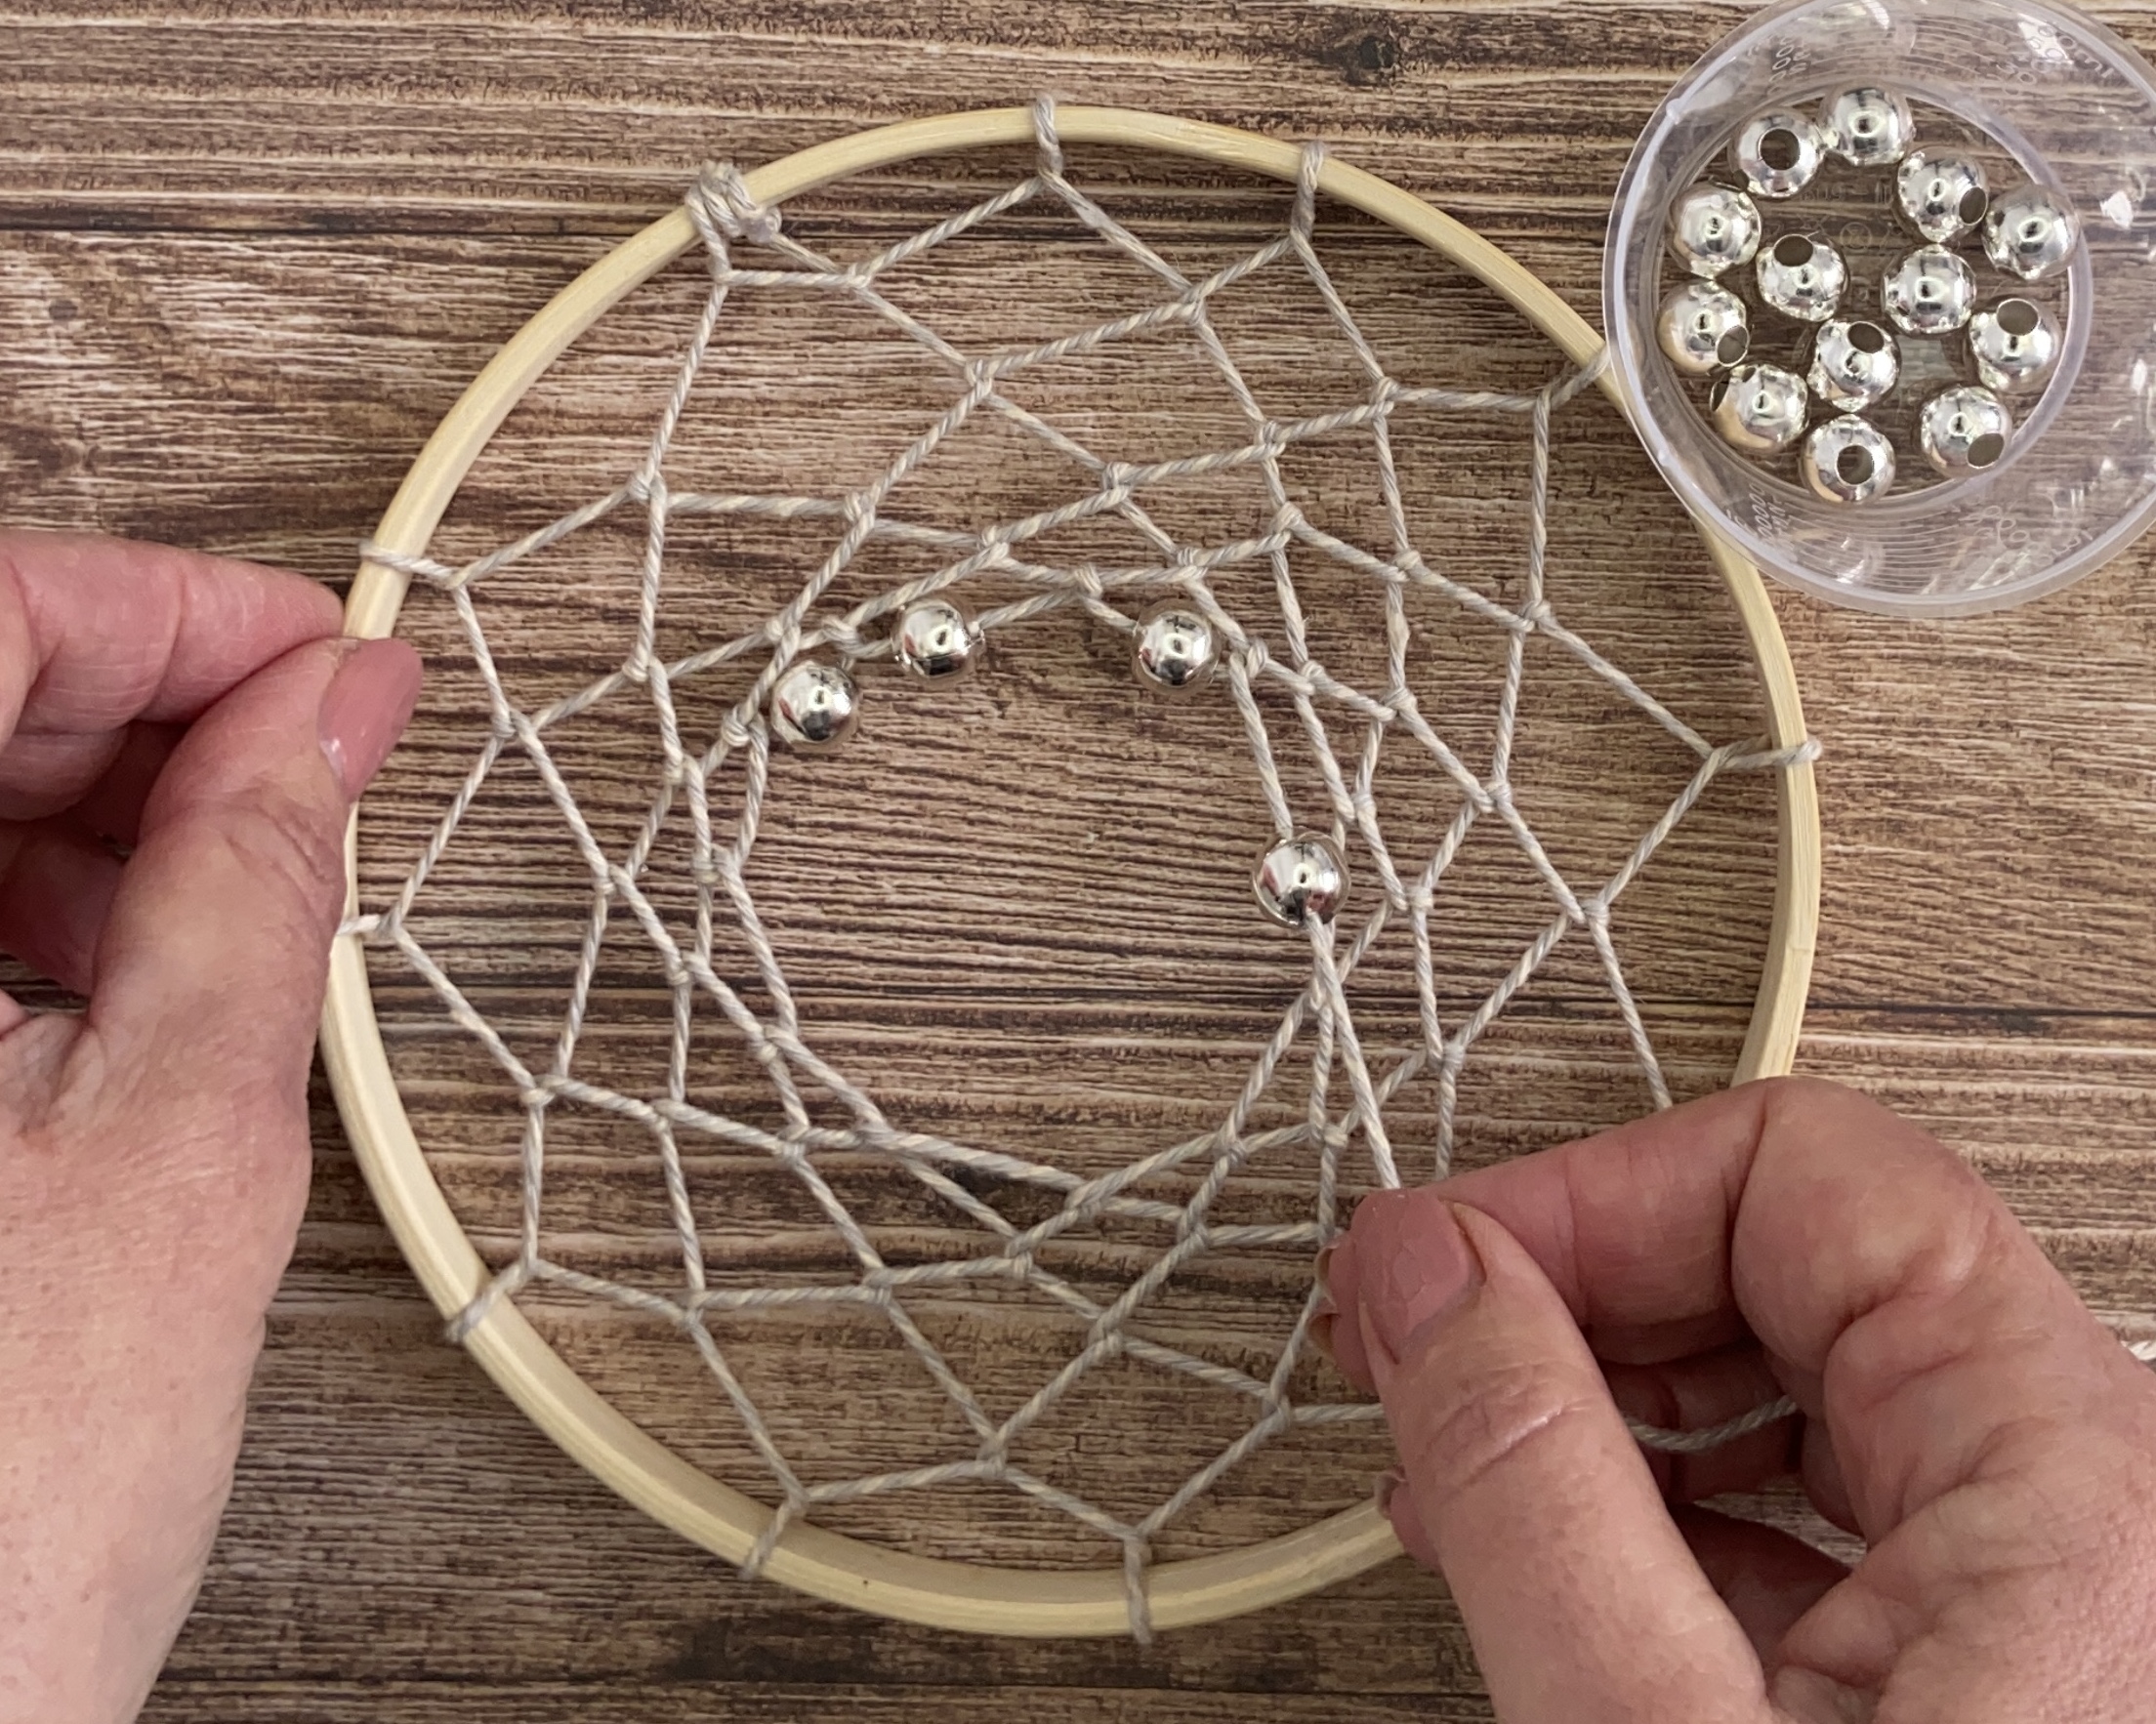 How to make a dreamcatcher - Gathered